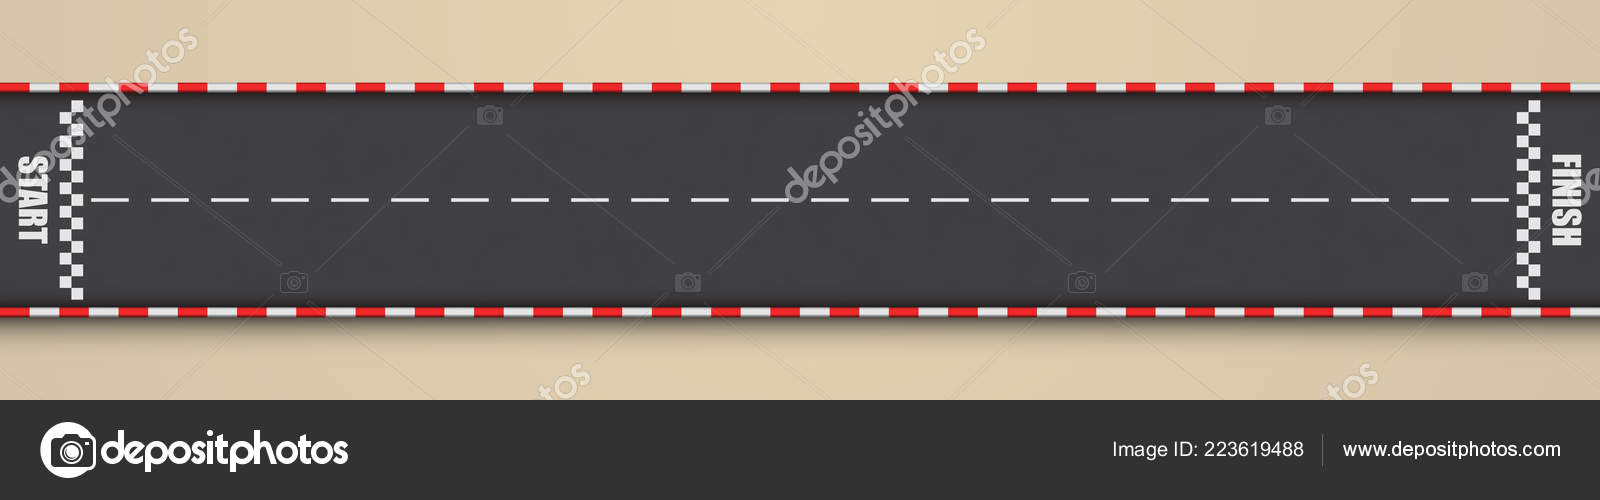 Cartoon Racing Track Quarter Mile Ride Top View Vector Illustration Stock  Vector Image by © #223619488